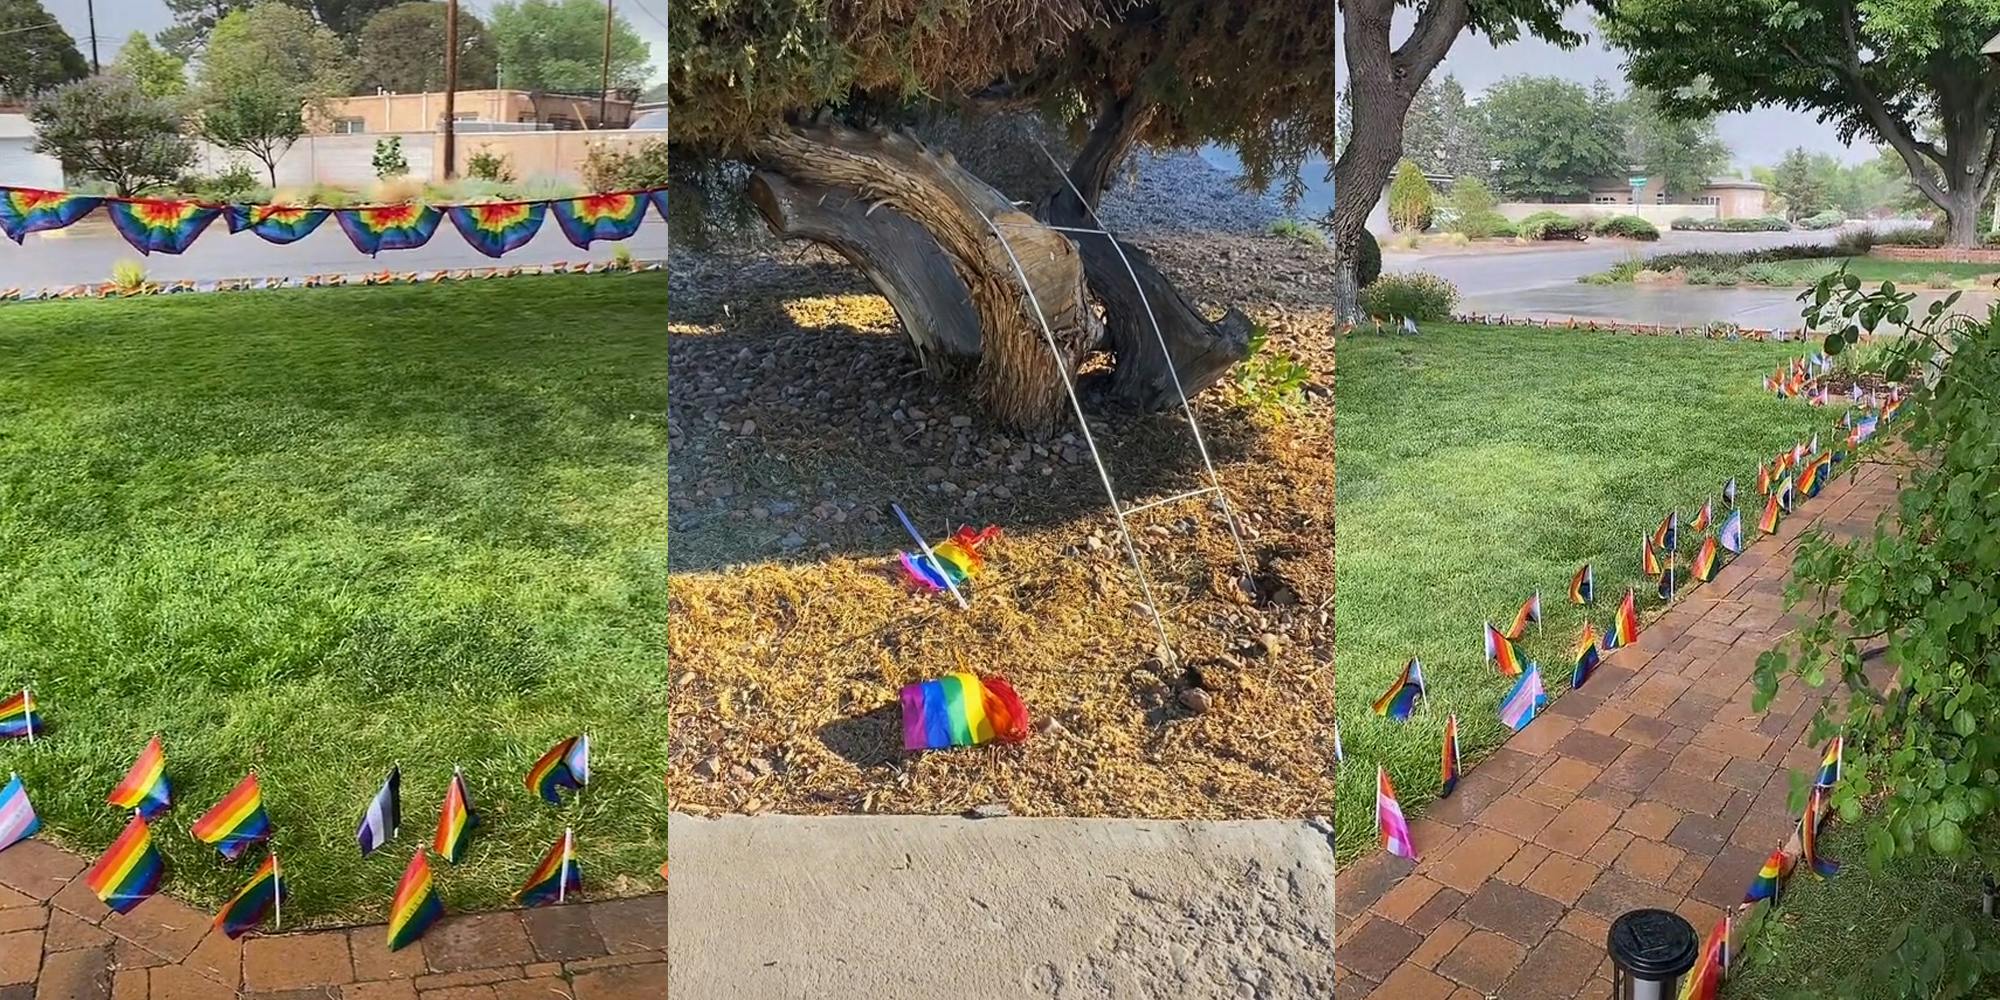 Yard with Pride decorations hung between trees and flags lining brick pathway (l) Pride flag damaged on ground up against tree (c) Pride flags lining brick pathway leading to driveway (r)